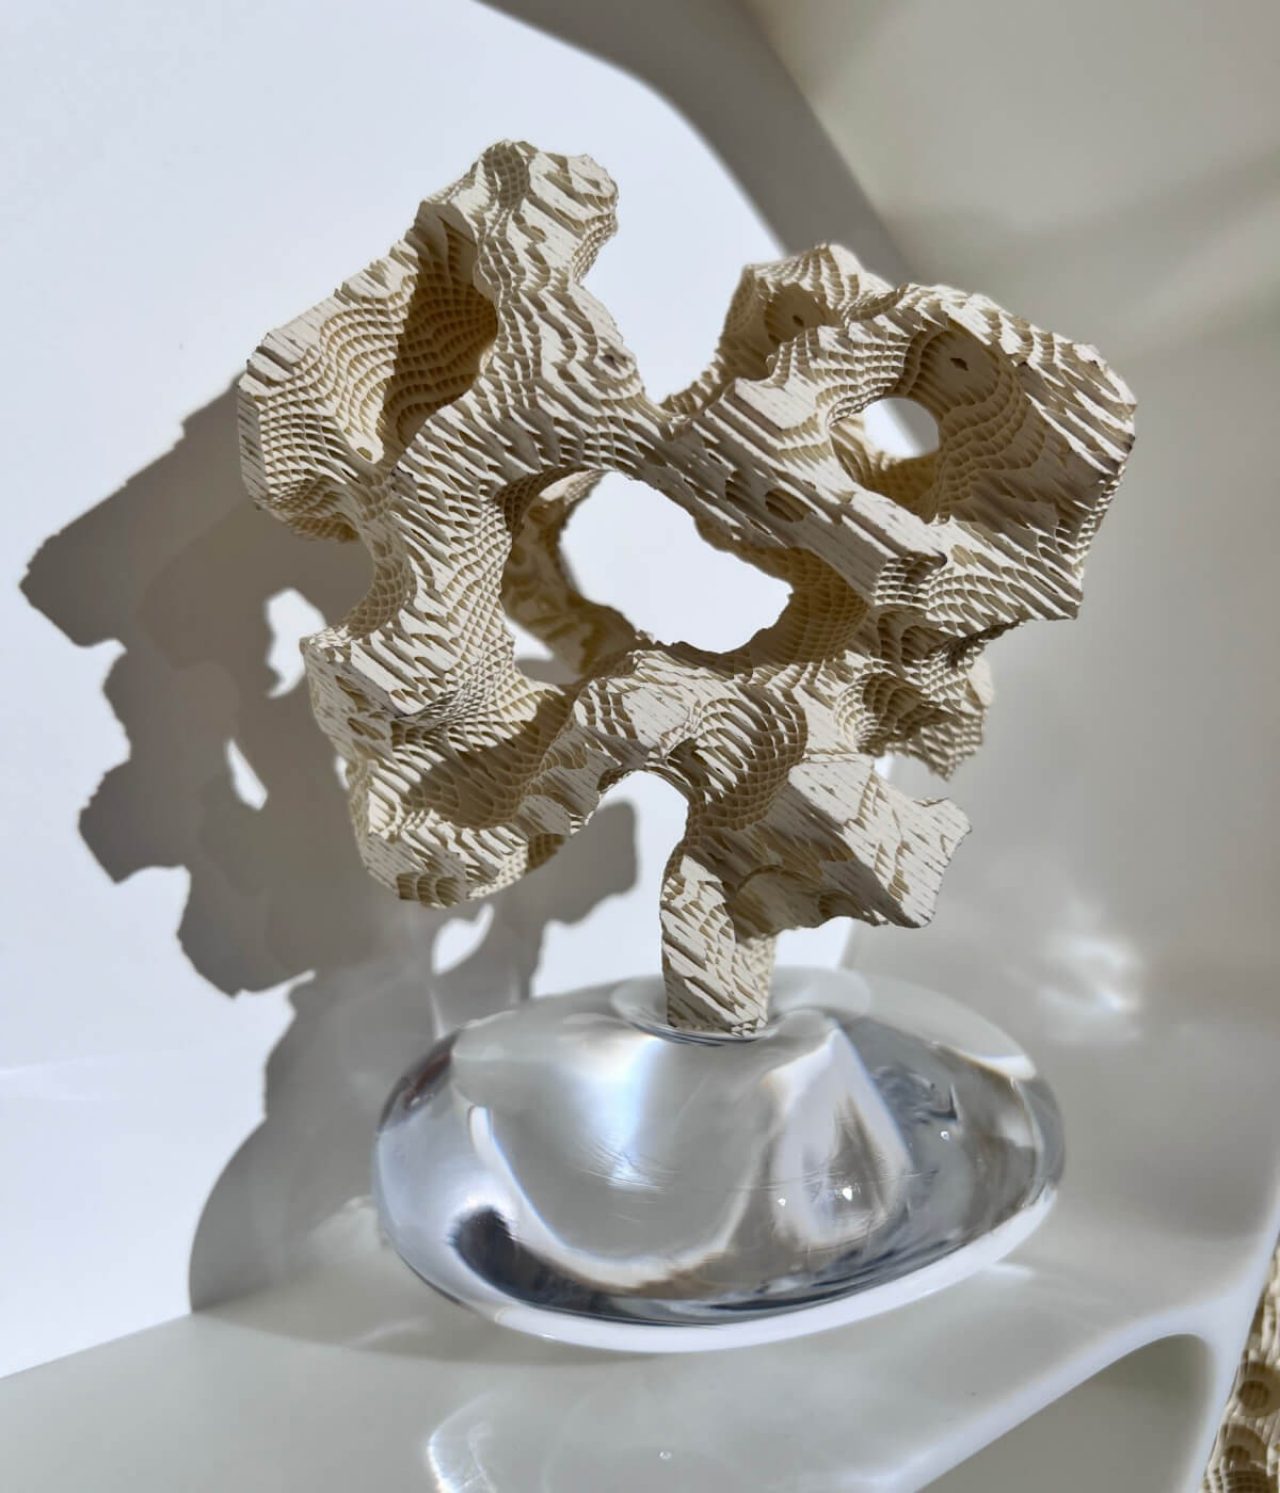 A close up of part of the piece which is a ceramic beige coral like structure, sitting in a clear glass plinth.